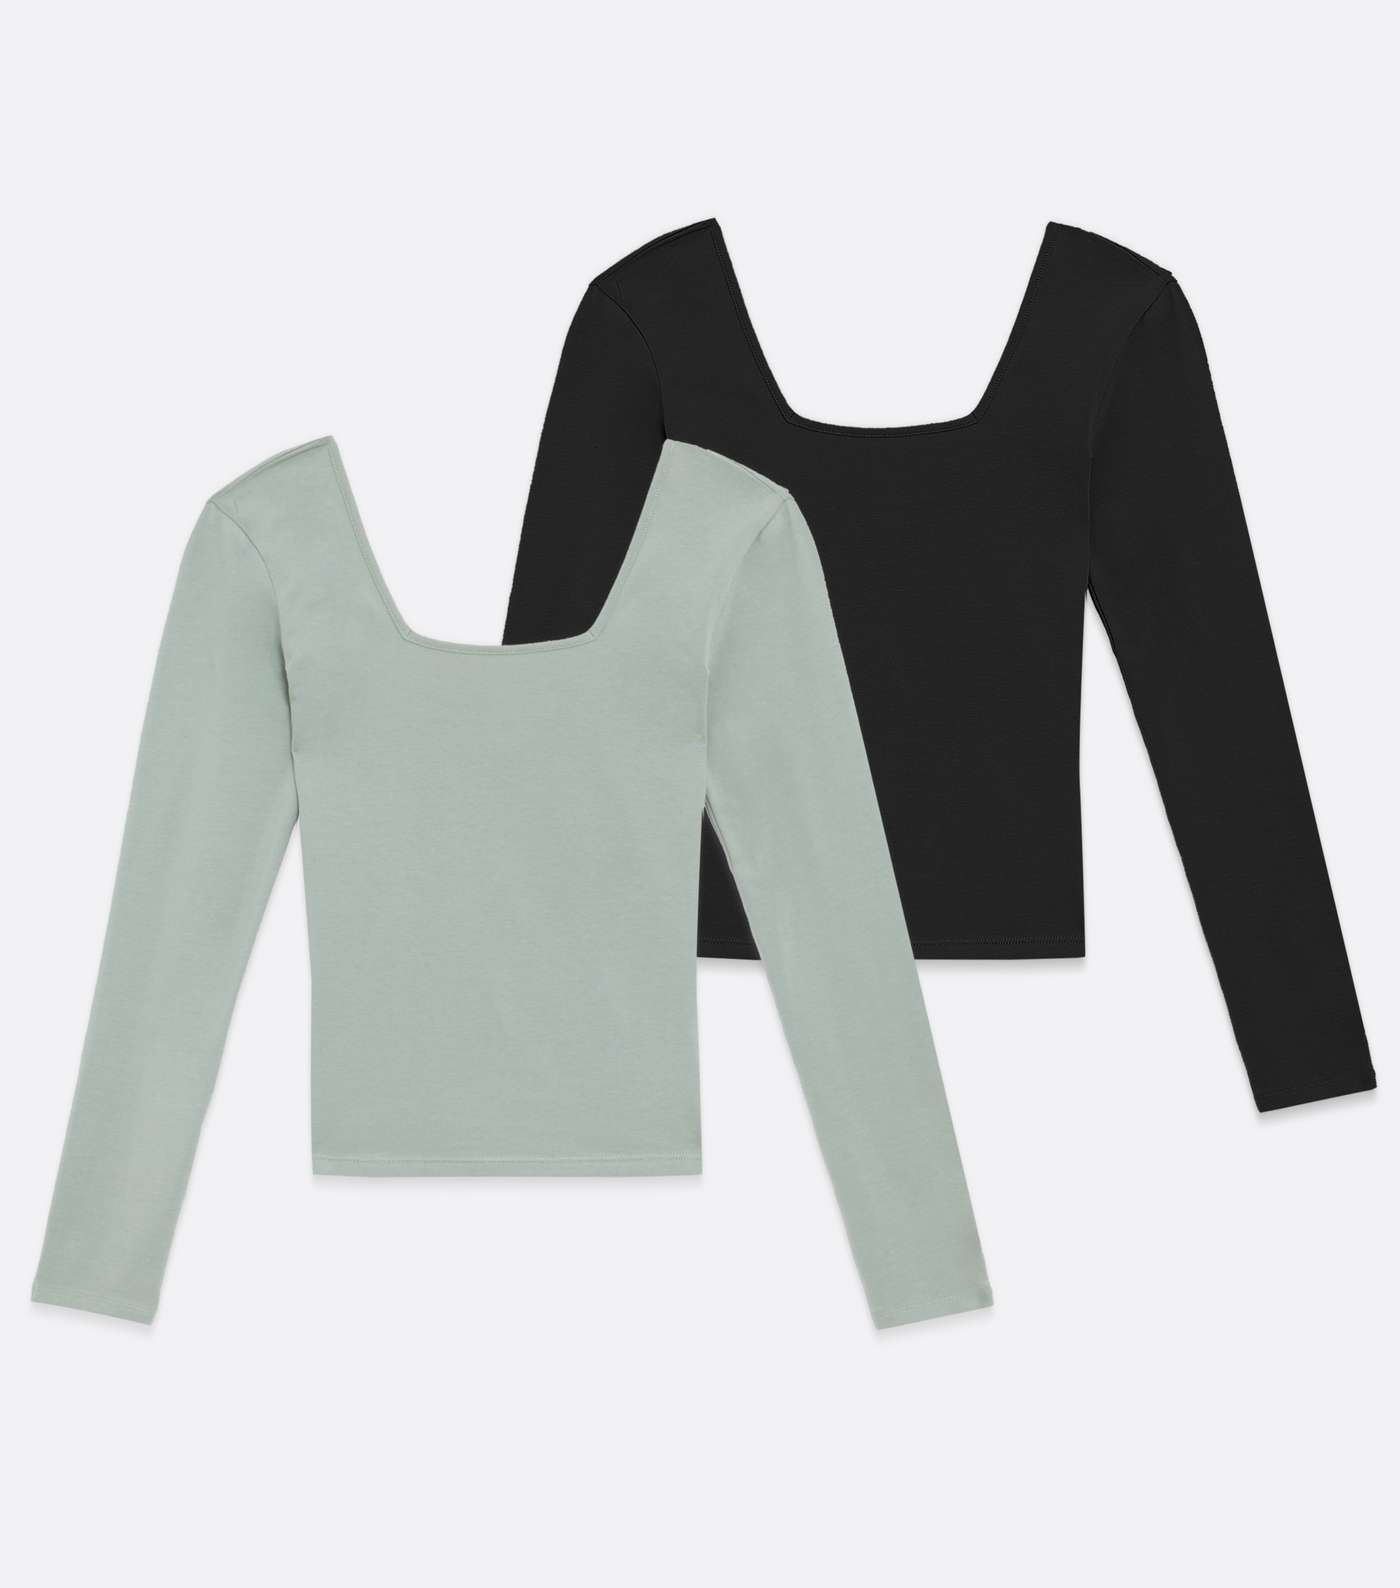 Petite 2 Pack Light Green and Black Square Neck Tops Image 5